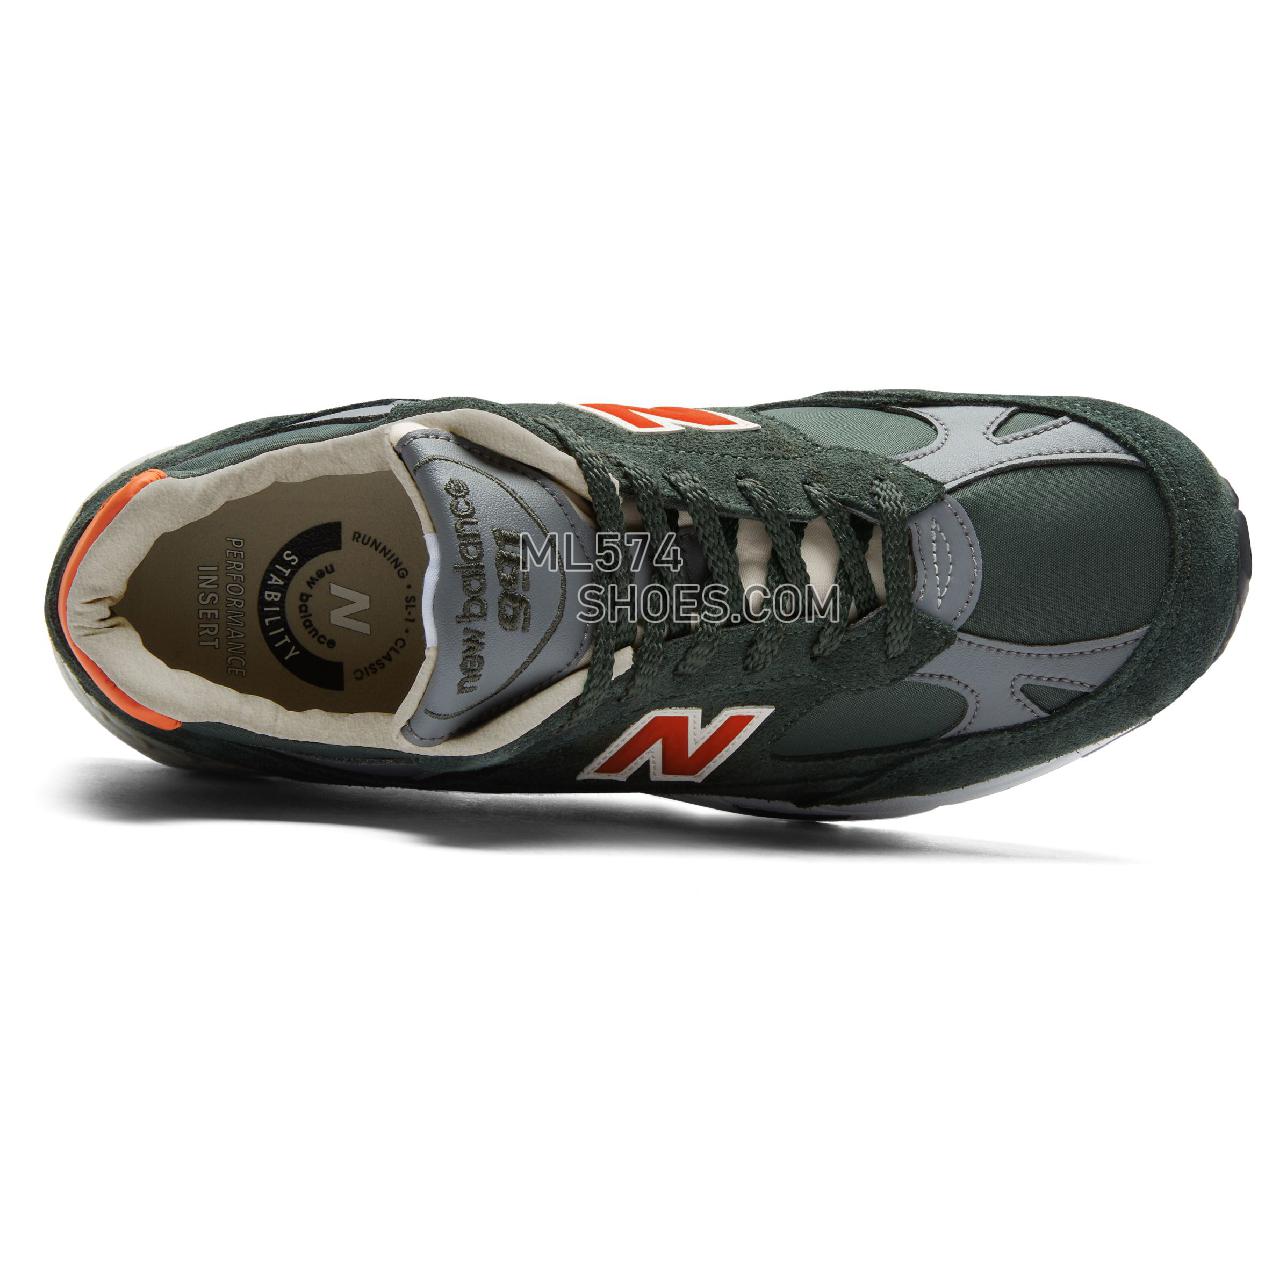 New Balance 991 Made in UK - Men's 991 Made in UK Classic M991-SN - Forest Green with Orange - M991TNF